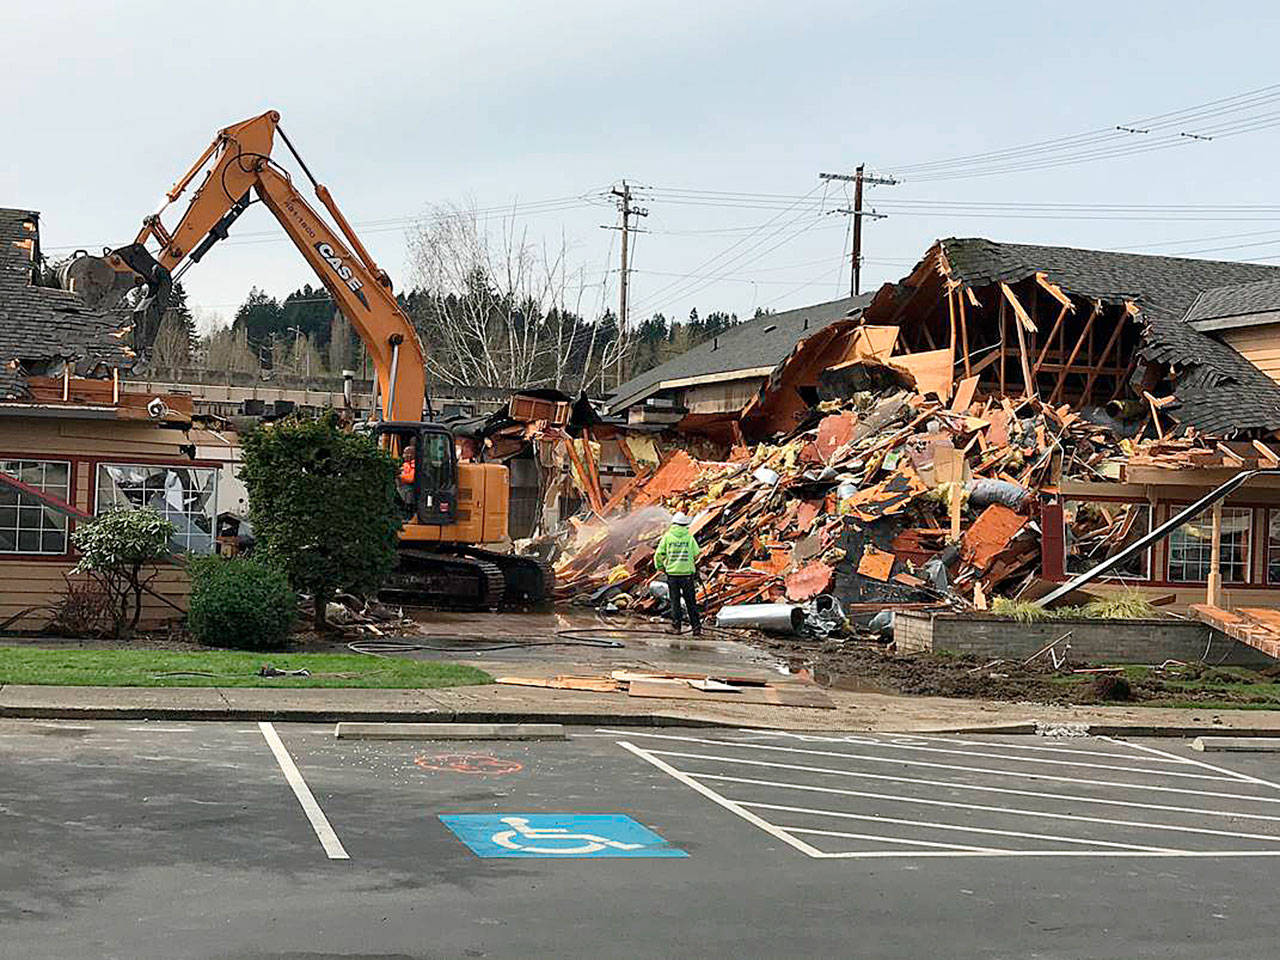 Denny’s Restaurant in the Canyon Park area of Bothell was torn down last week to make way for a new Chick-Fil-A franchise. (Photo courtesy of Parl Guthrie)